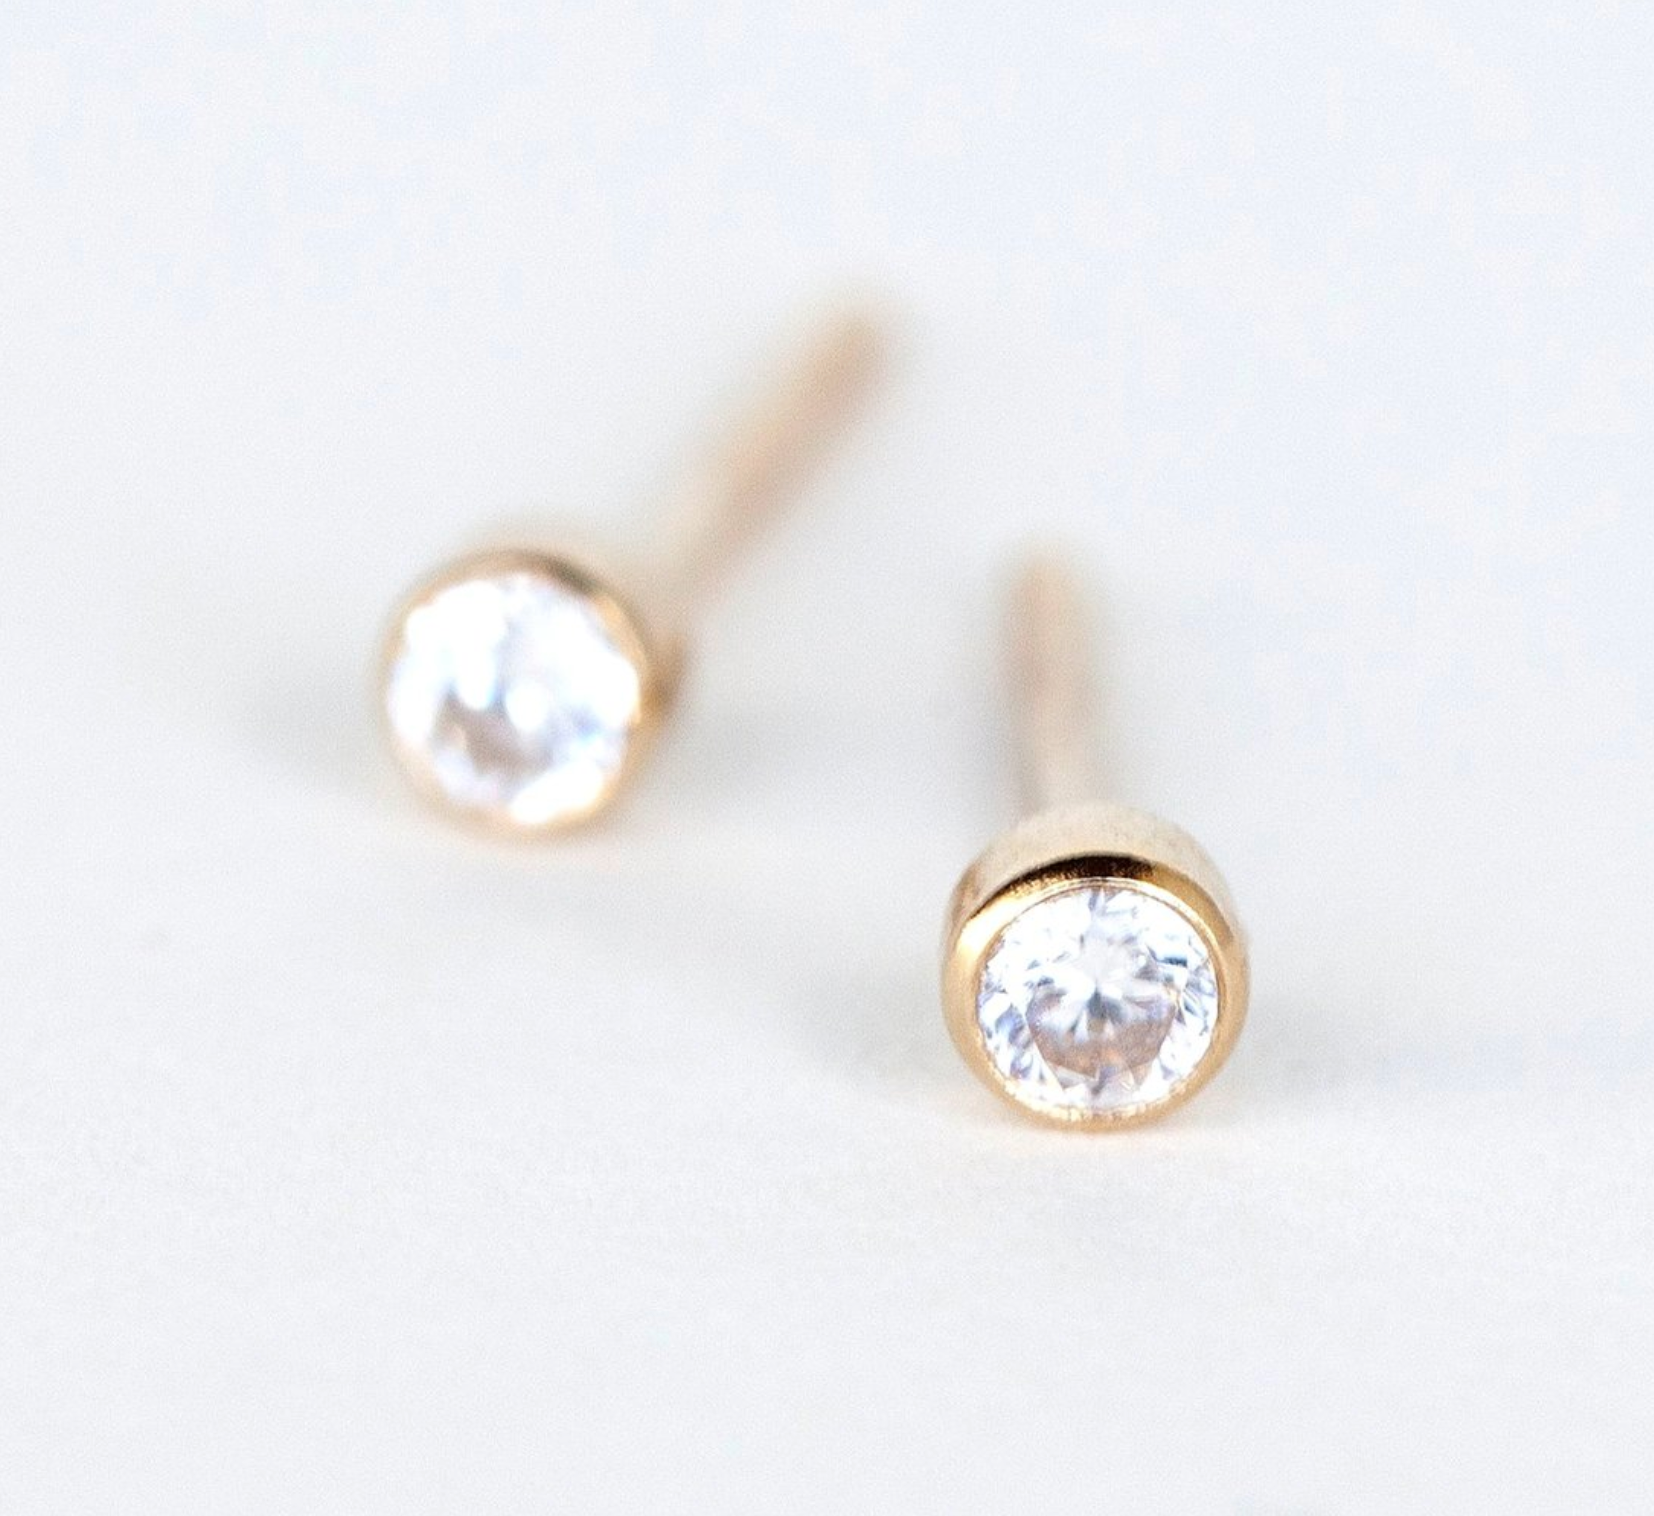 14k gold plated and zircon Cutler earrings